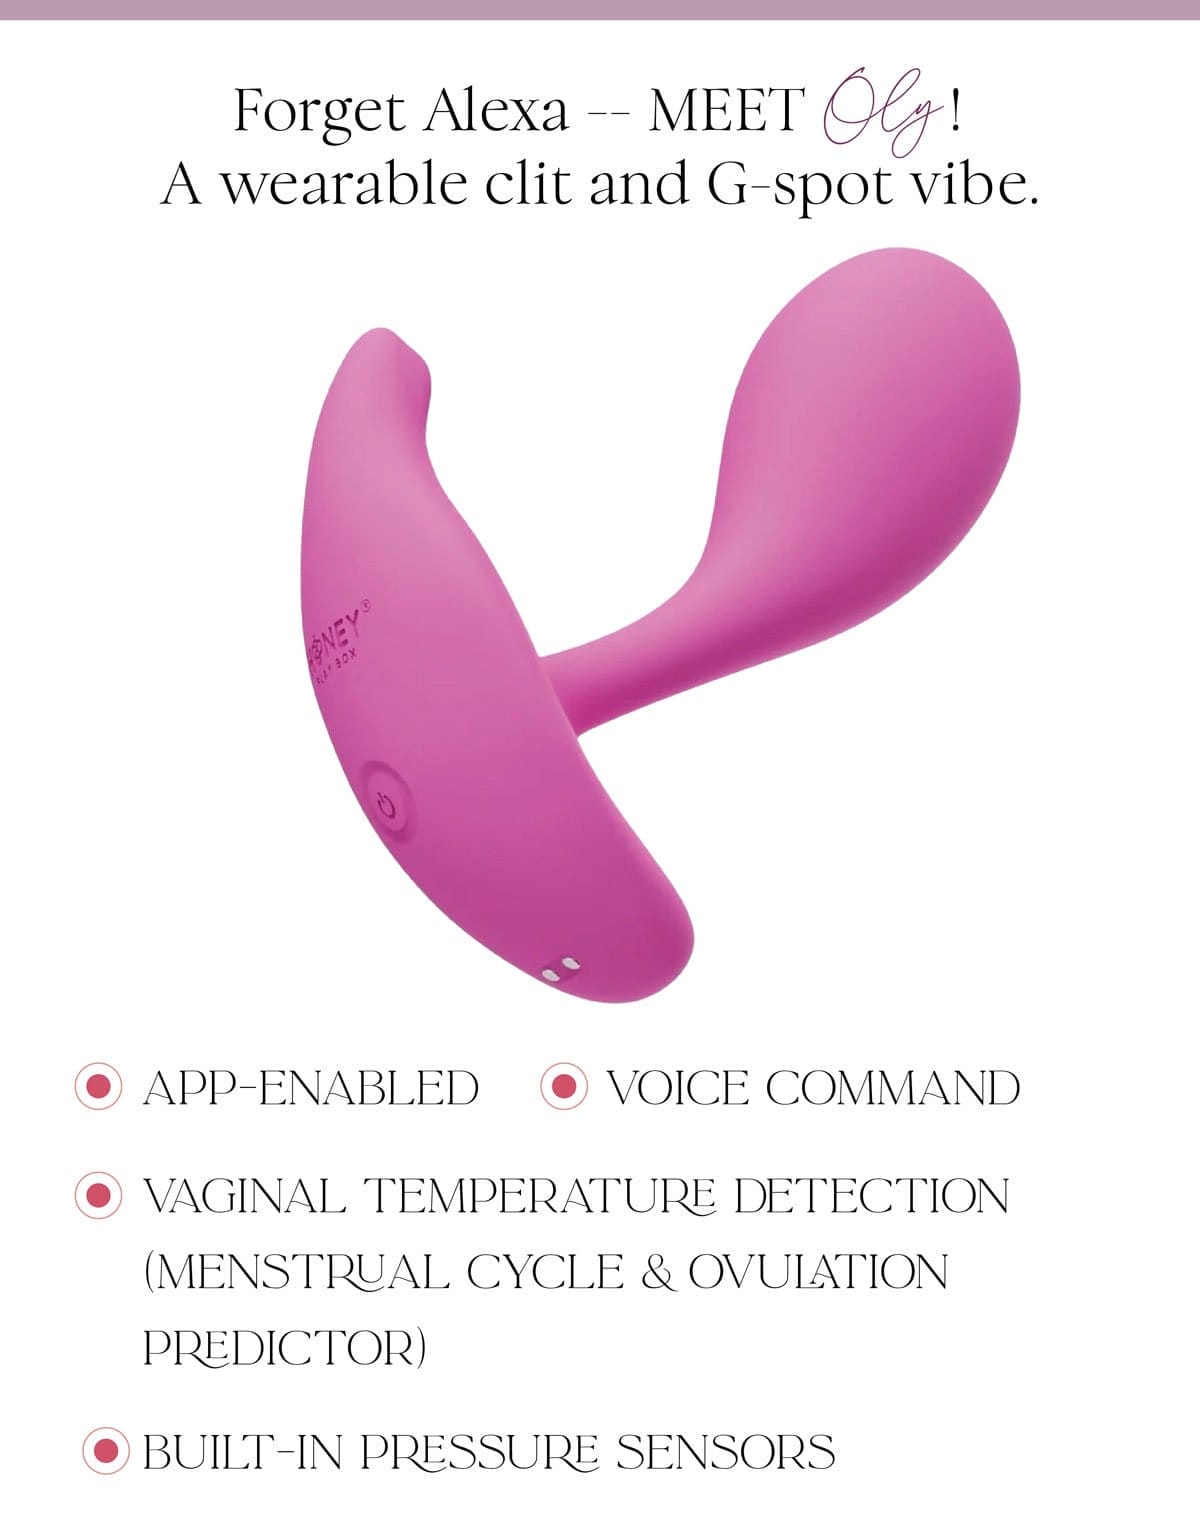 Forget Alexa -- MEET Oly! A wearable clit and G-spot vibe. App-enabled Voice command Vaginal temperature detection (menstrual cycle & ovulation predictor) Built-in pressure sensors